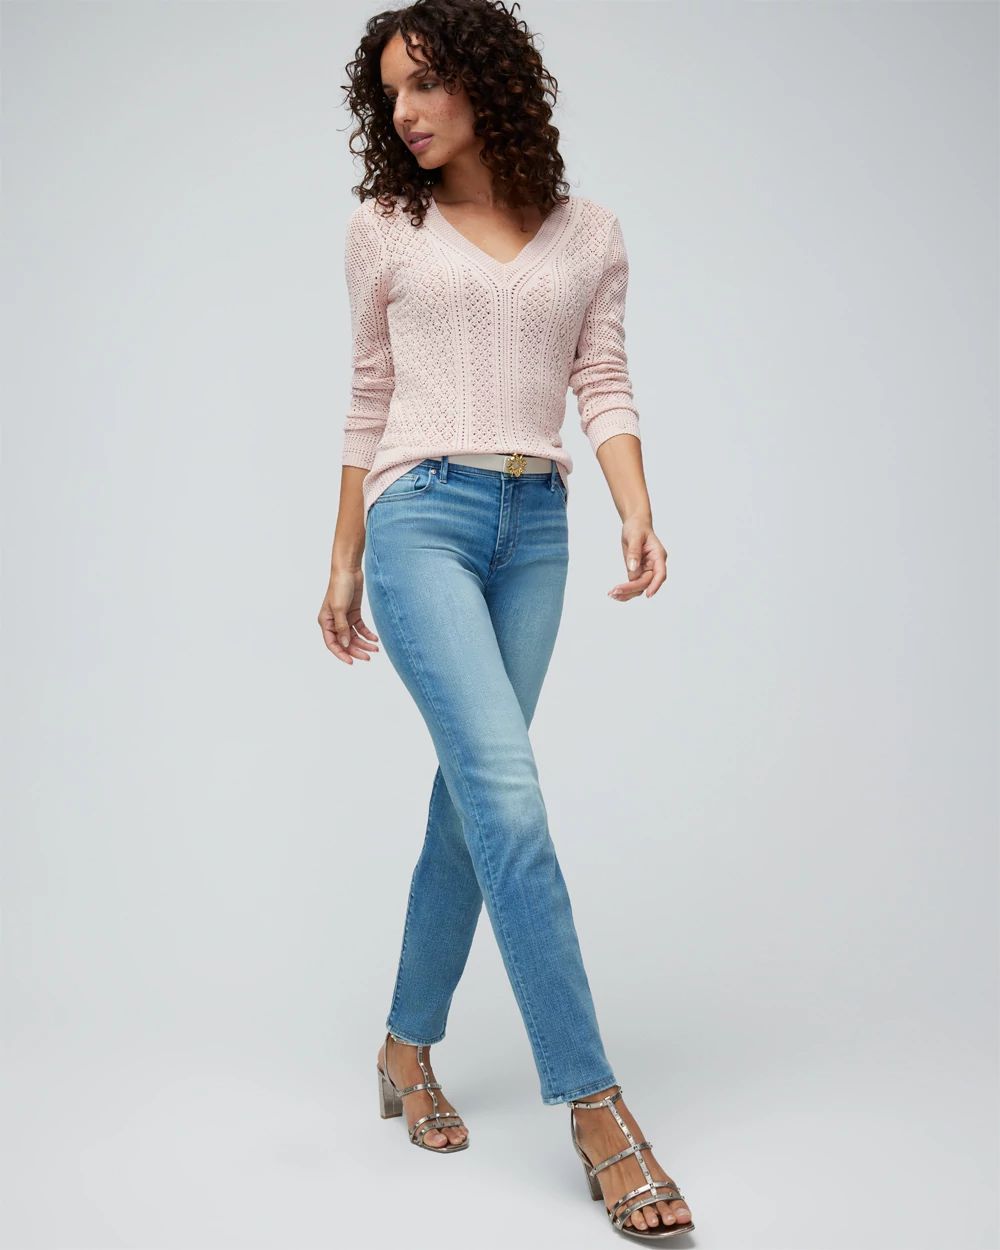 Long Sleeve Pointelle V-Neck Pullover click to view larger image.